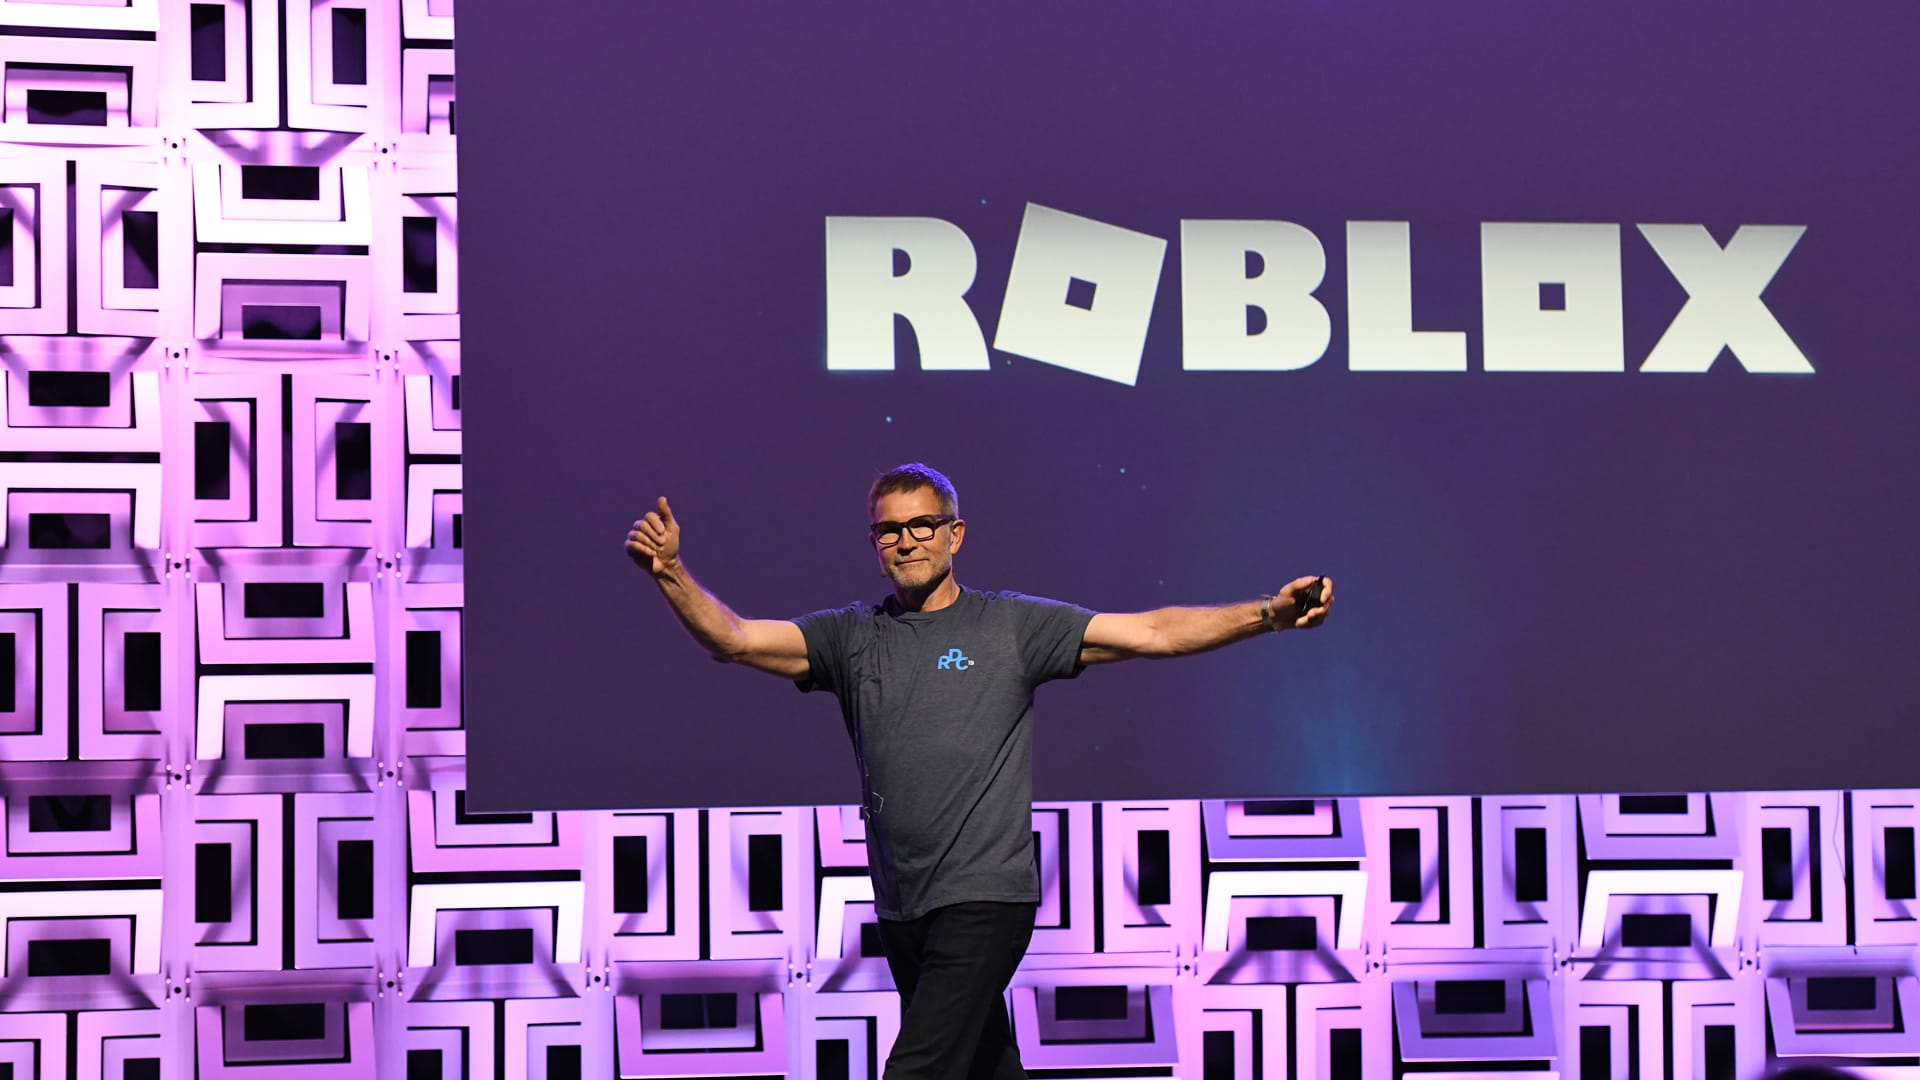 ‘Roblox’ isn’t just a gaming company. It’s also the future of education